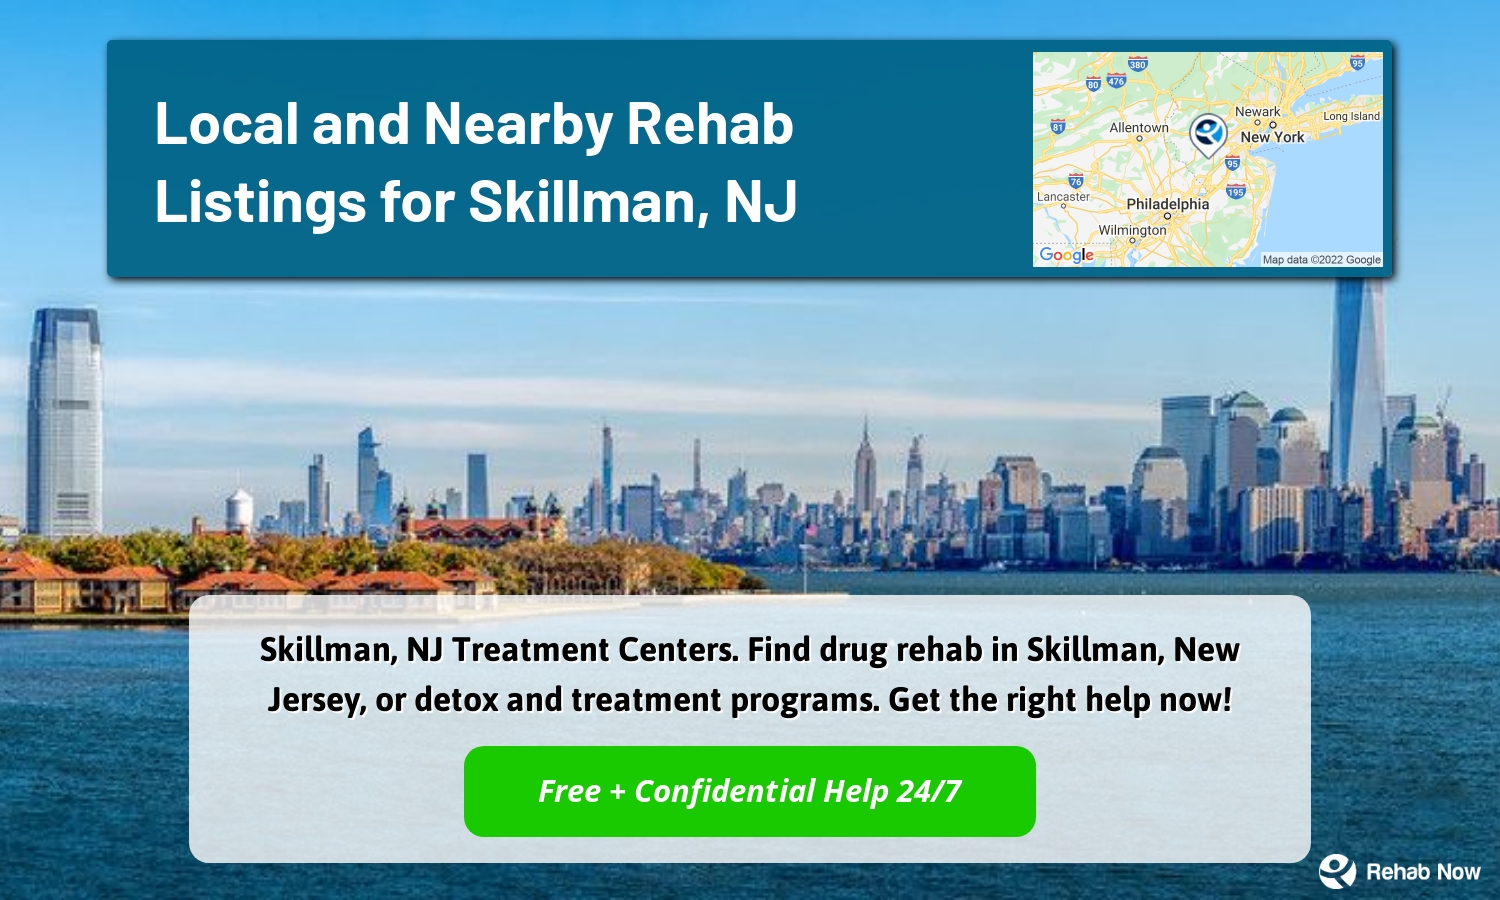 Skillman, NJ Treatment Centers. Find drug rehab in Skillman, New Jersey, or detox and treatment programs. Get the right help now!